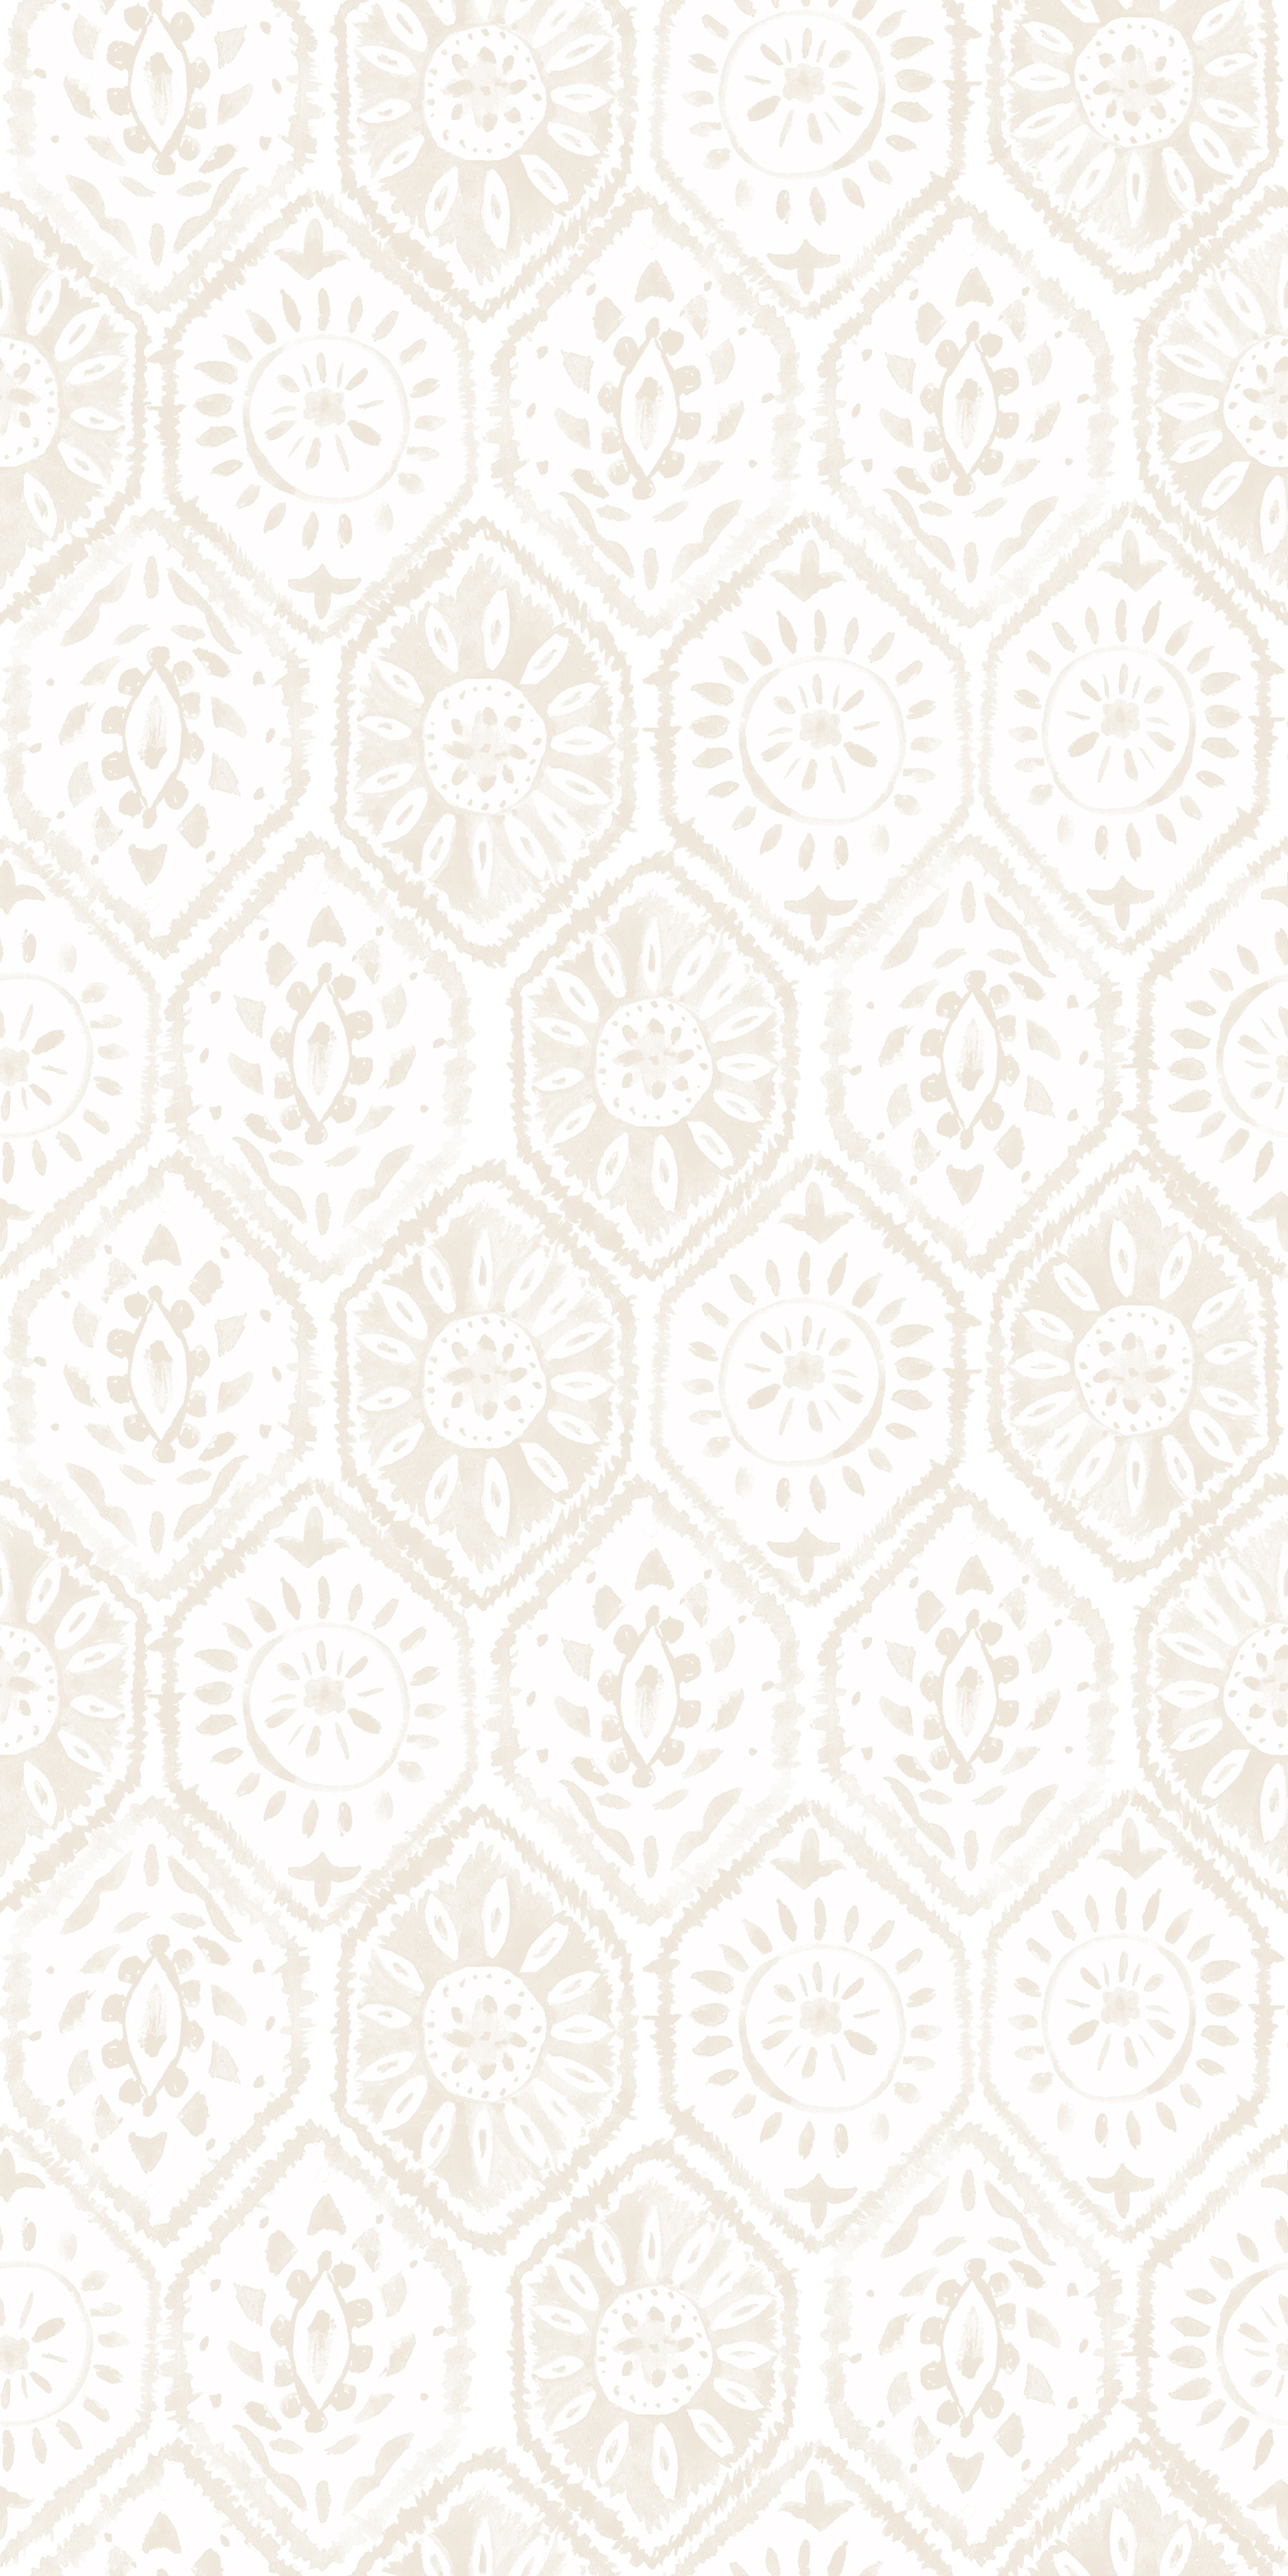 Close-up of the Moroccan Tile Wallpaper in Ecru showcasing its elegant geometric design inspired by traditional Moroccan tiles. The wallpaper features a subtle contrast of beige and off-white hues, ideal for adding a touch of sophistication and warmth to any room.